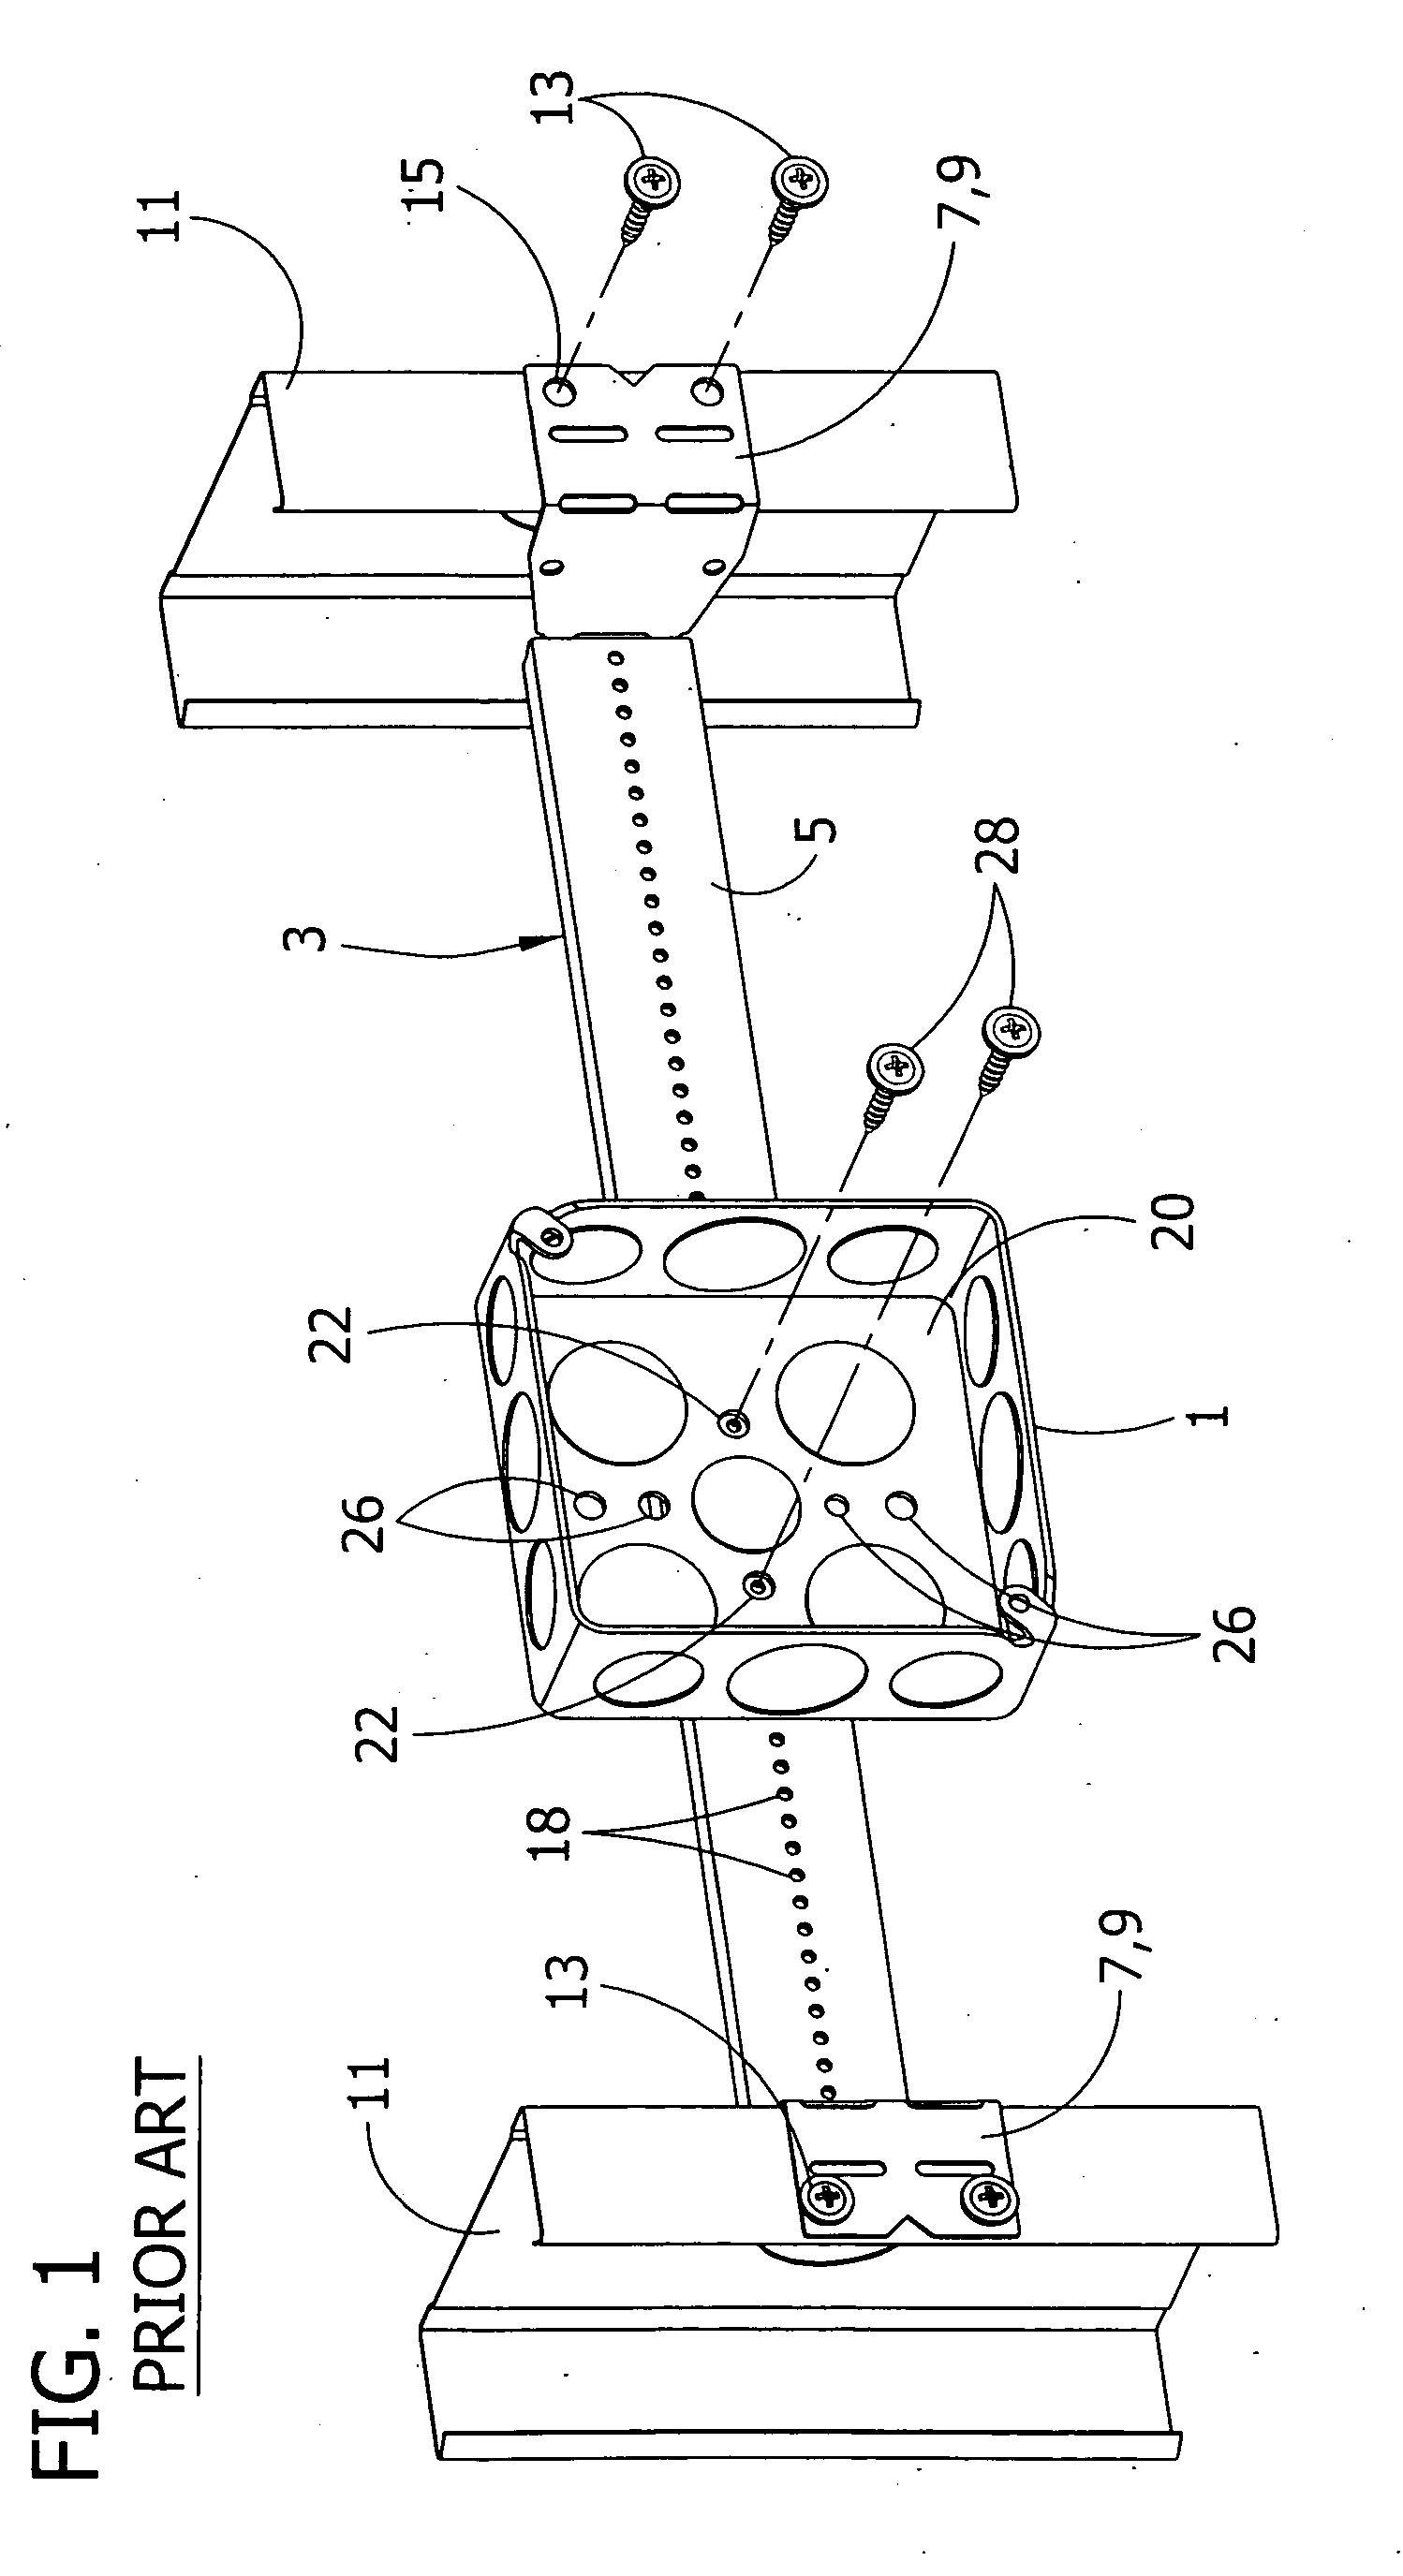 Bracket for mounting an electrical device